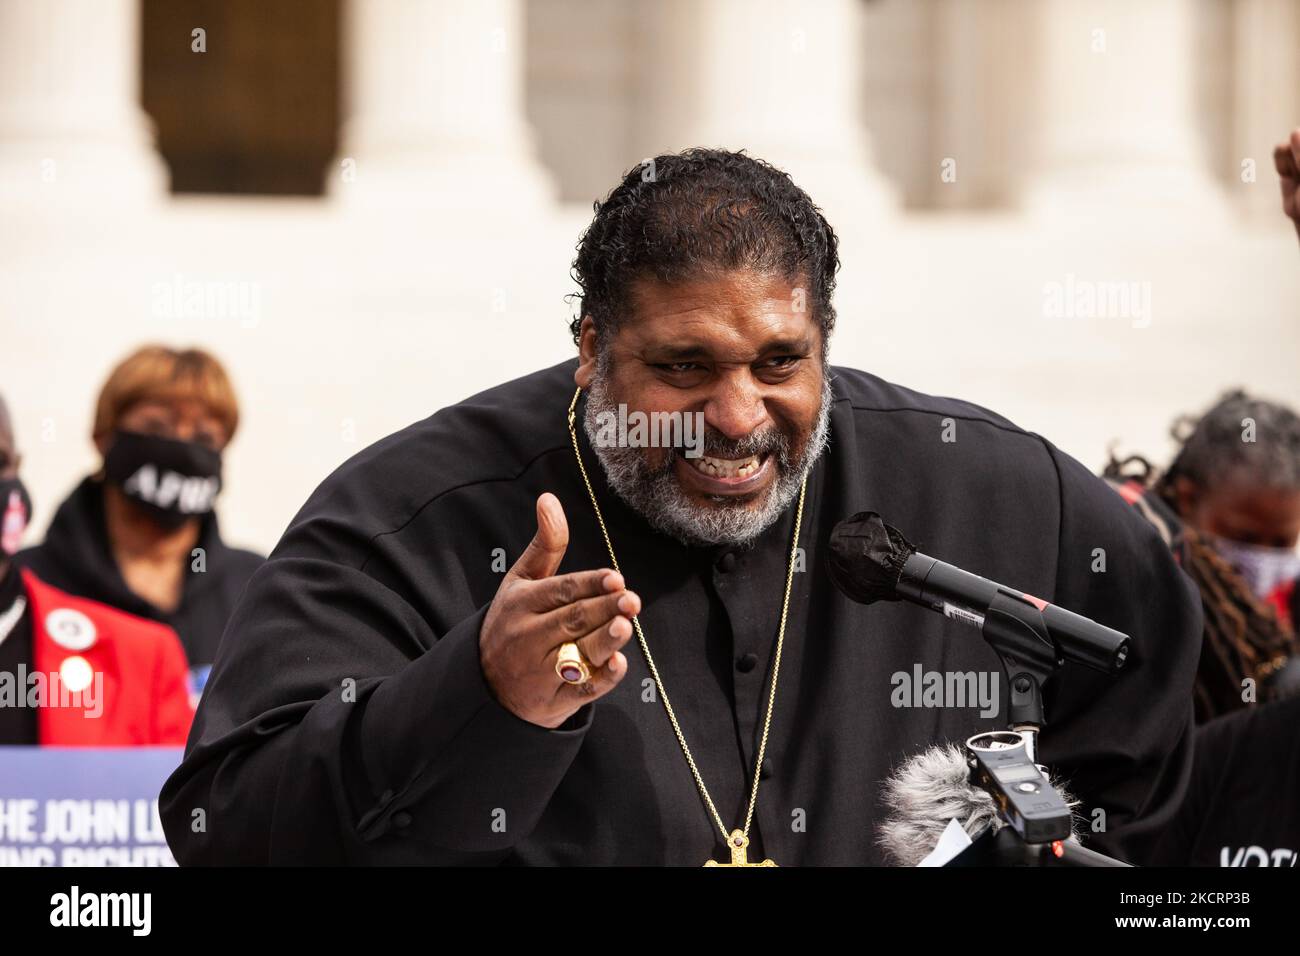 Bishop William Barber speaks during a rally at the Supreme Court for voting rights and economic justice. Protesters are demanding that Congress to pass legislation protecting the right to vote and providing economic assistance to Americans. Specifically, they want passage of the Freedom to Vote Act, the Build Back Better Act, and the Infrastructure Investment and Jobs Act. (Photo by Allison Bailey/NurPhoto) Stock Photo